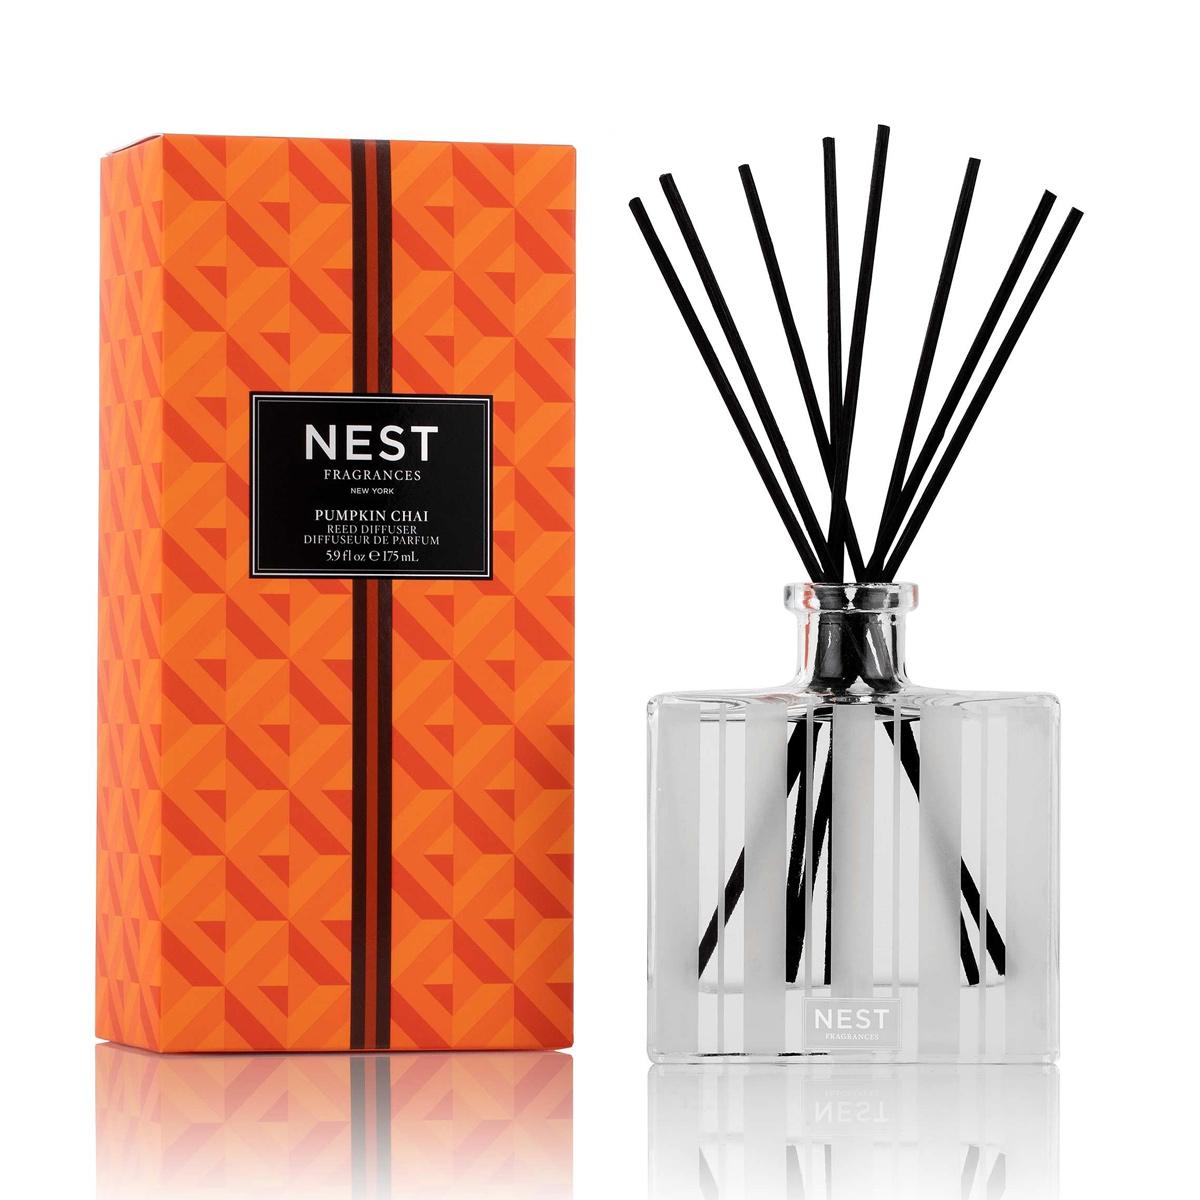 Primary image of Pumpkin Chai Reed Diffuser